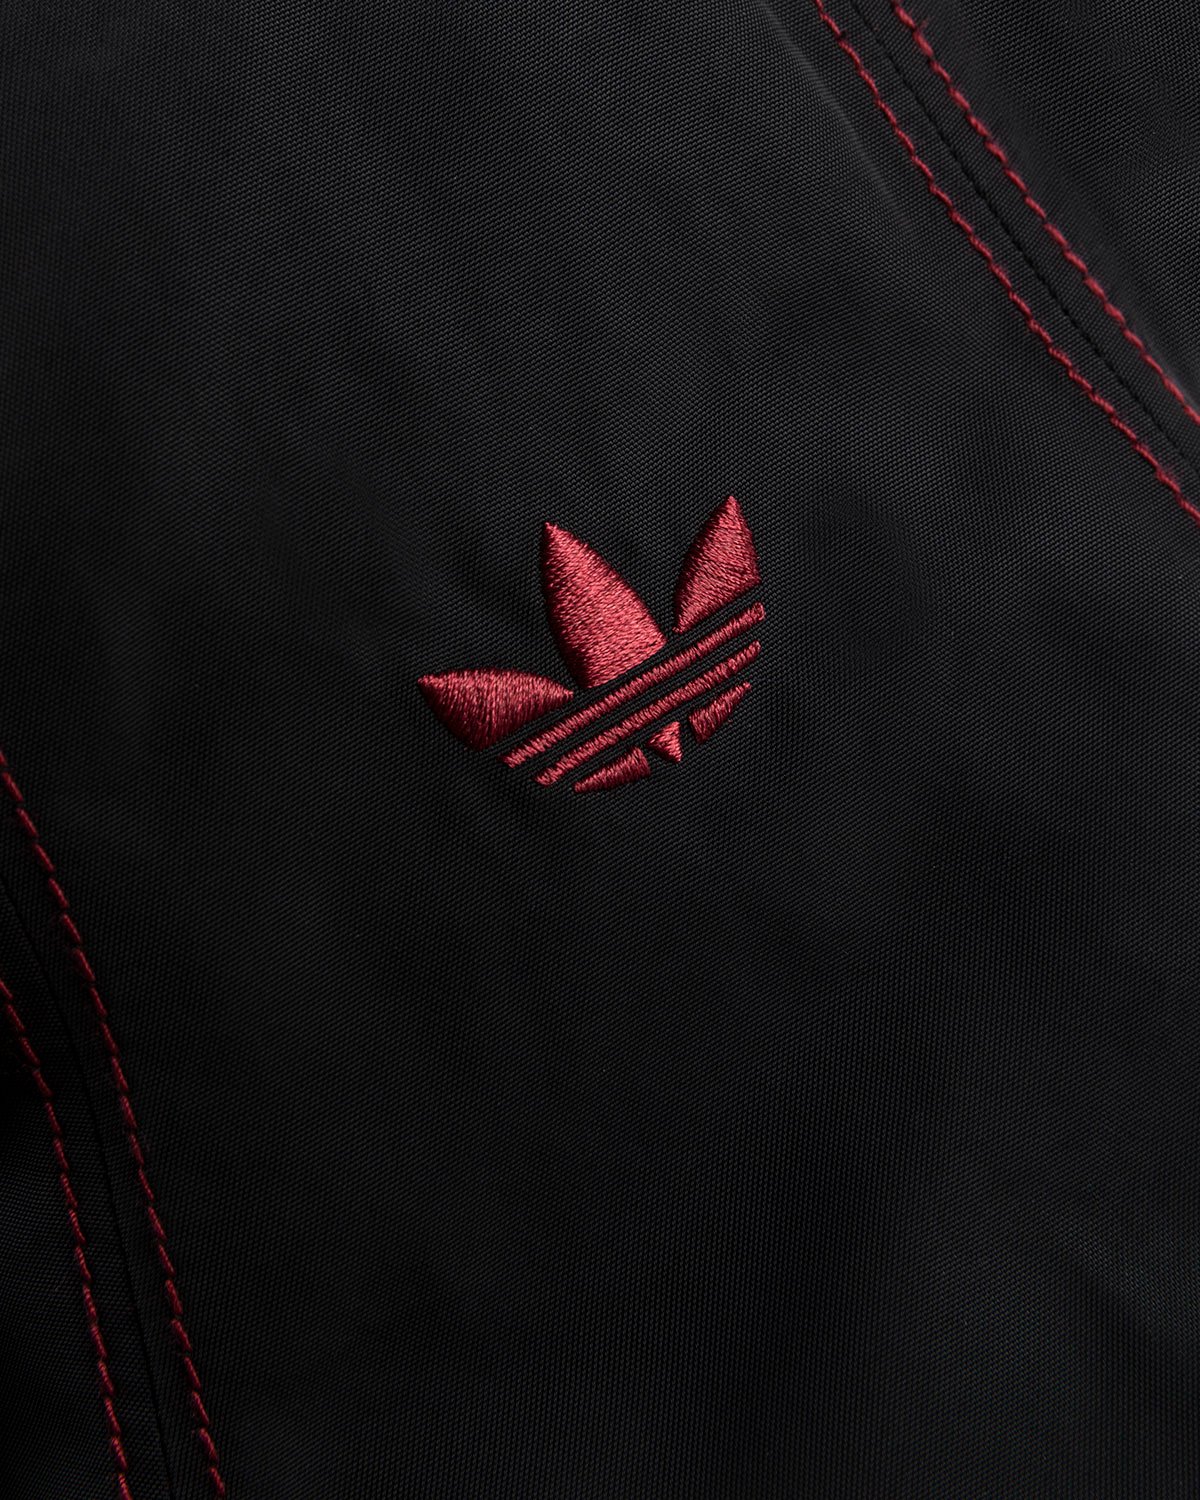 Adidas x Wales Bonner - Sunhat Black Burgundy - Accessories - Red - Image 4